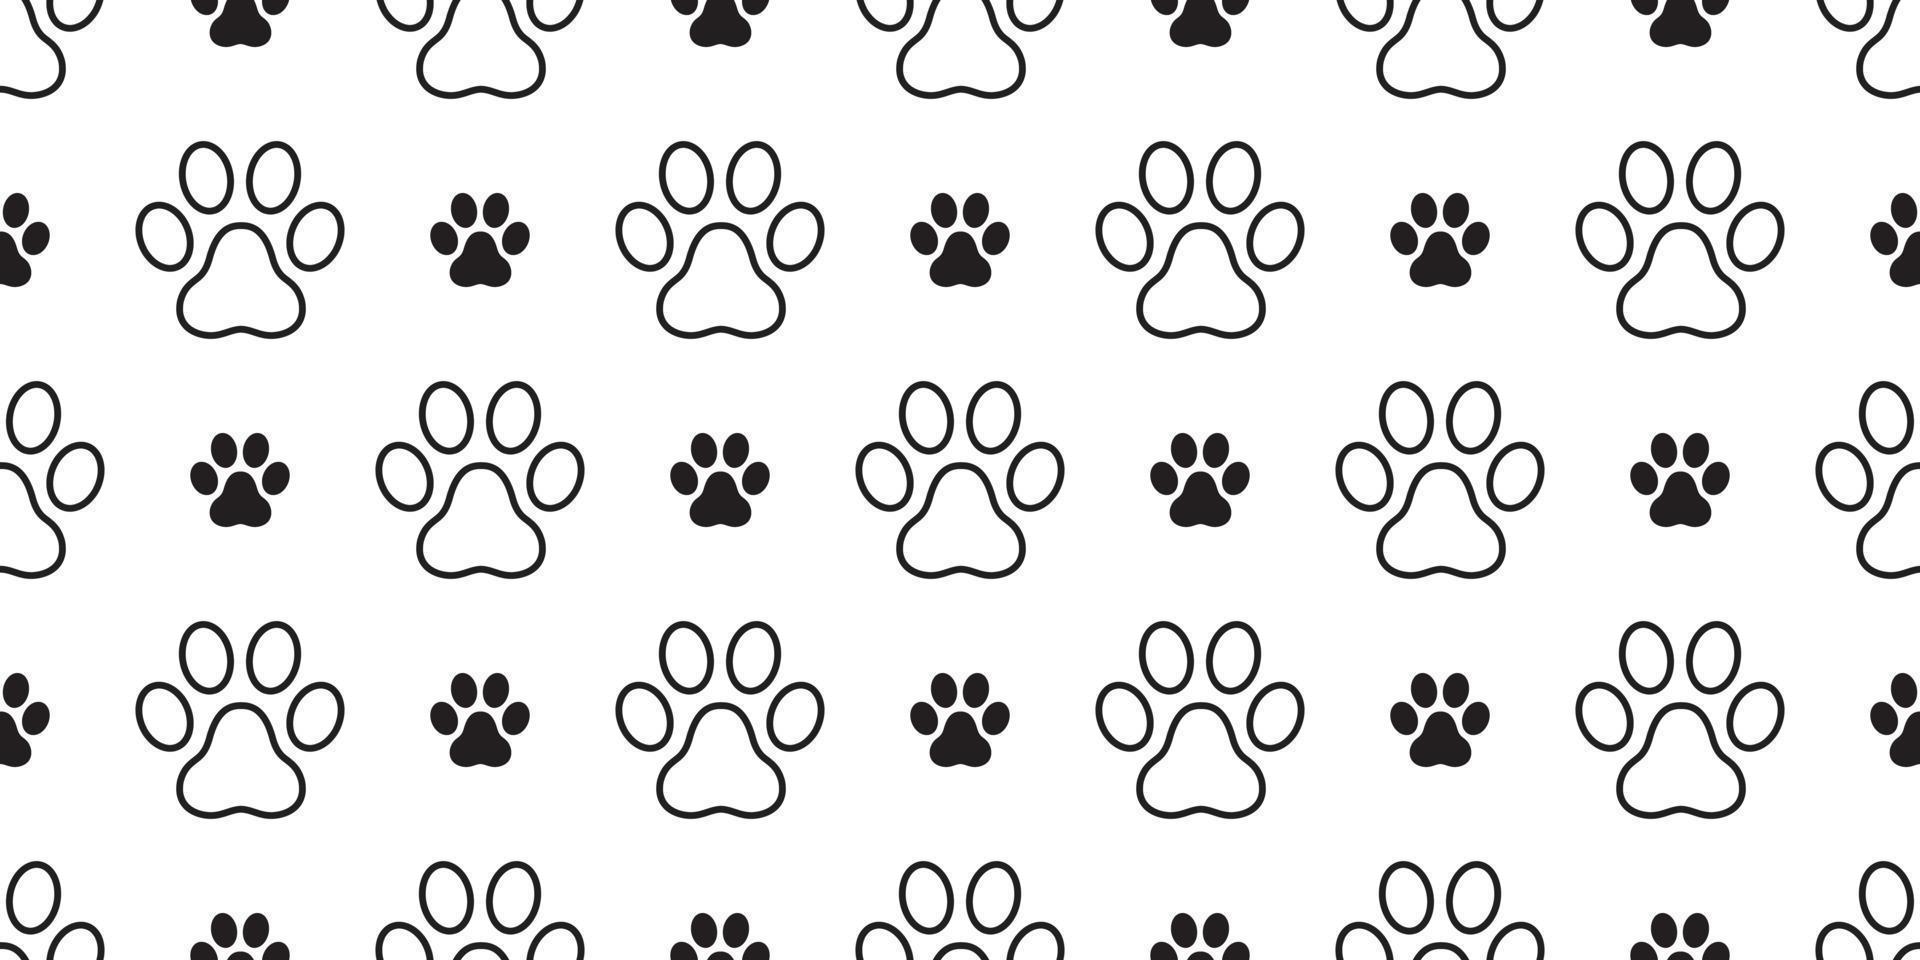 Dog Paw Seamless Pattern vector Cat Paw footprint isolated repeat background wallpaper